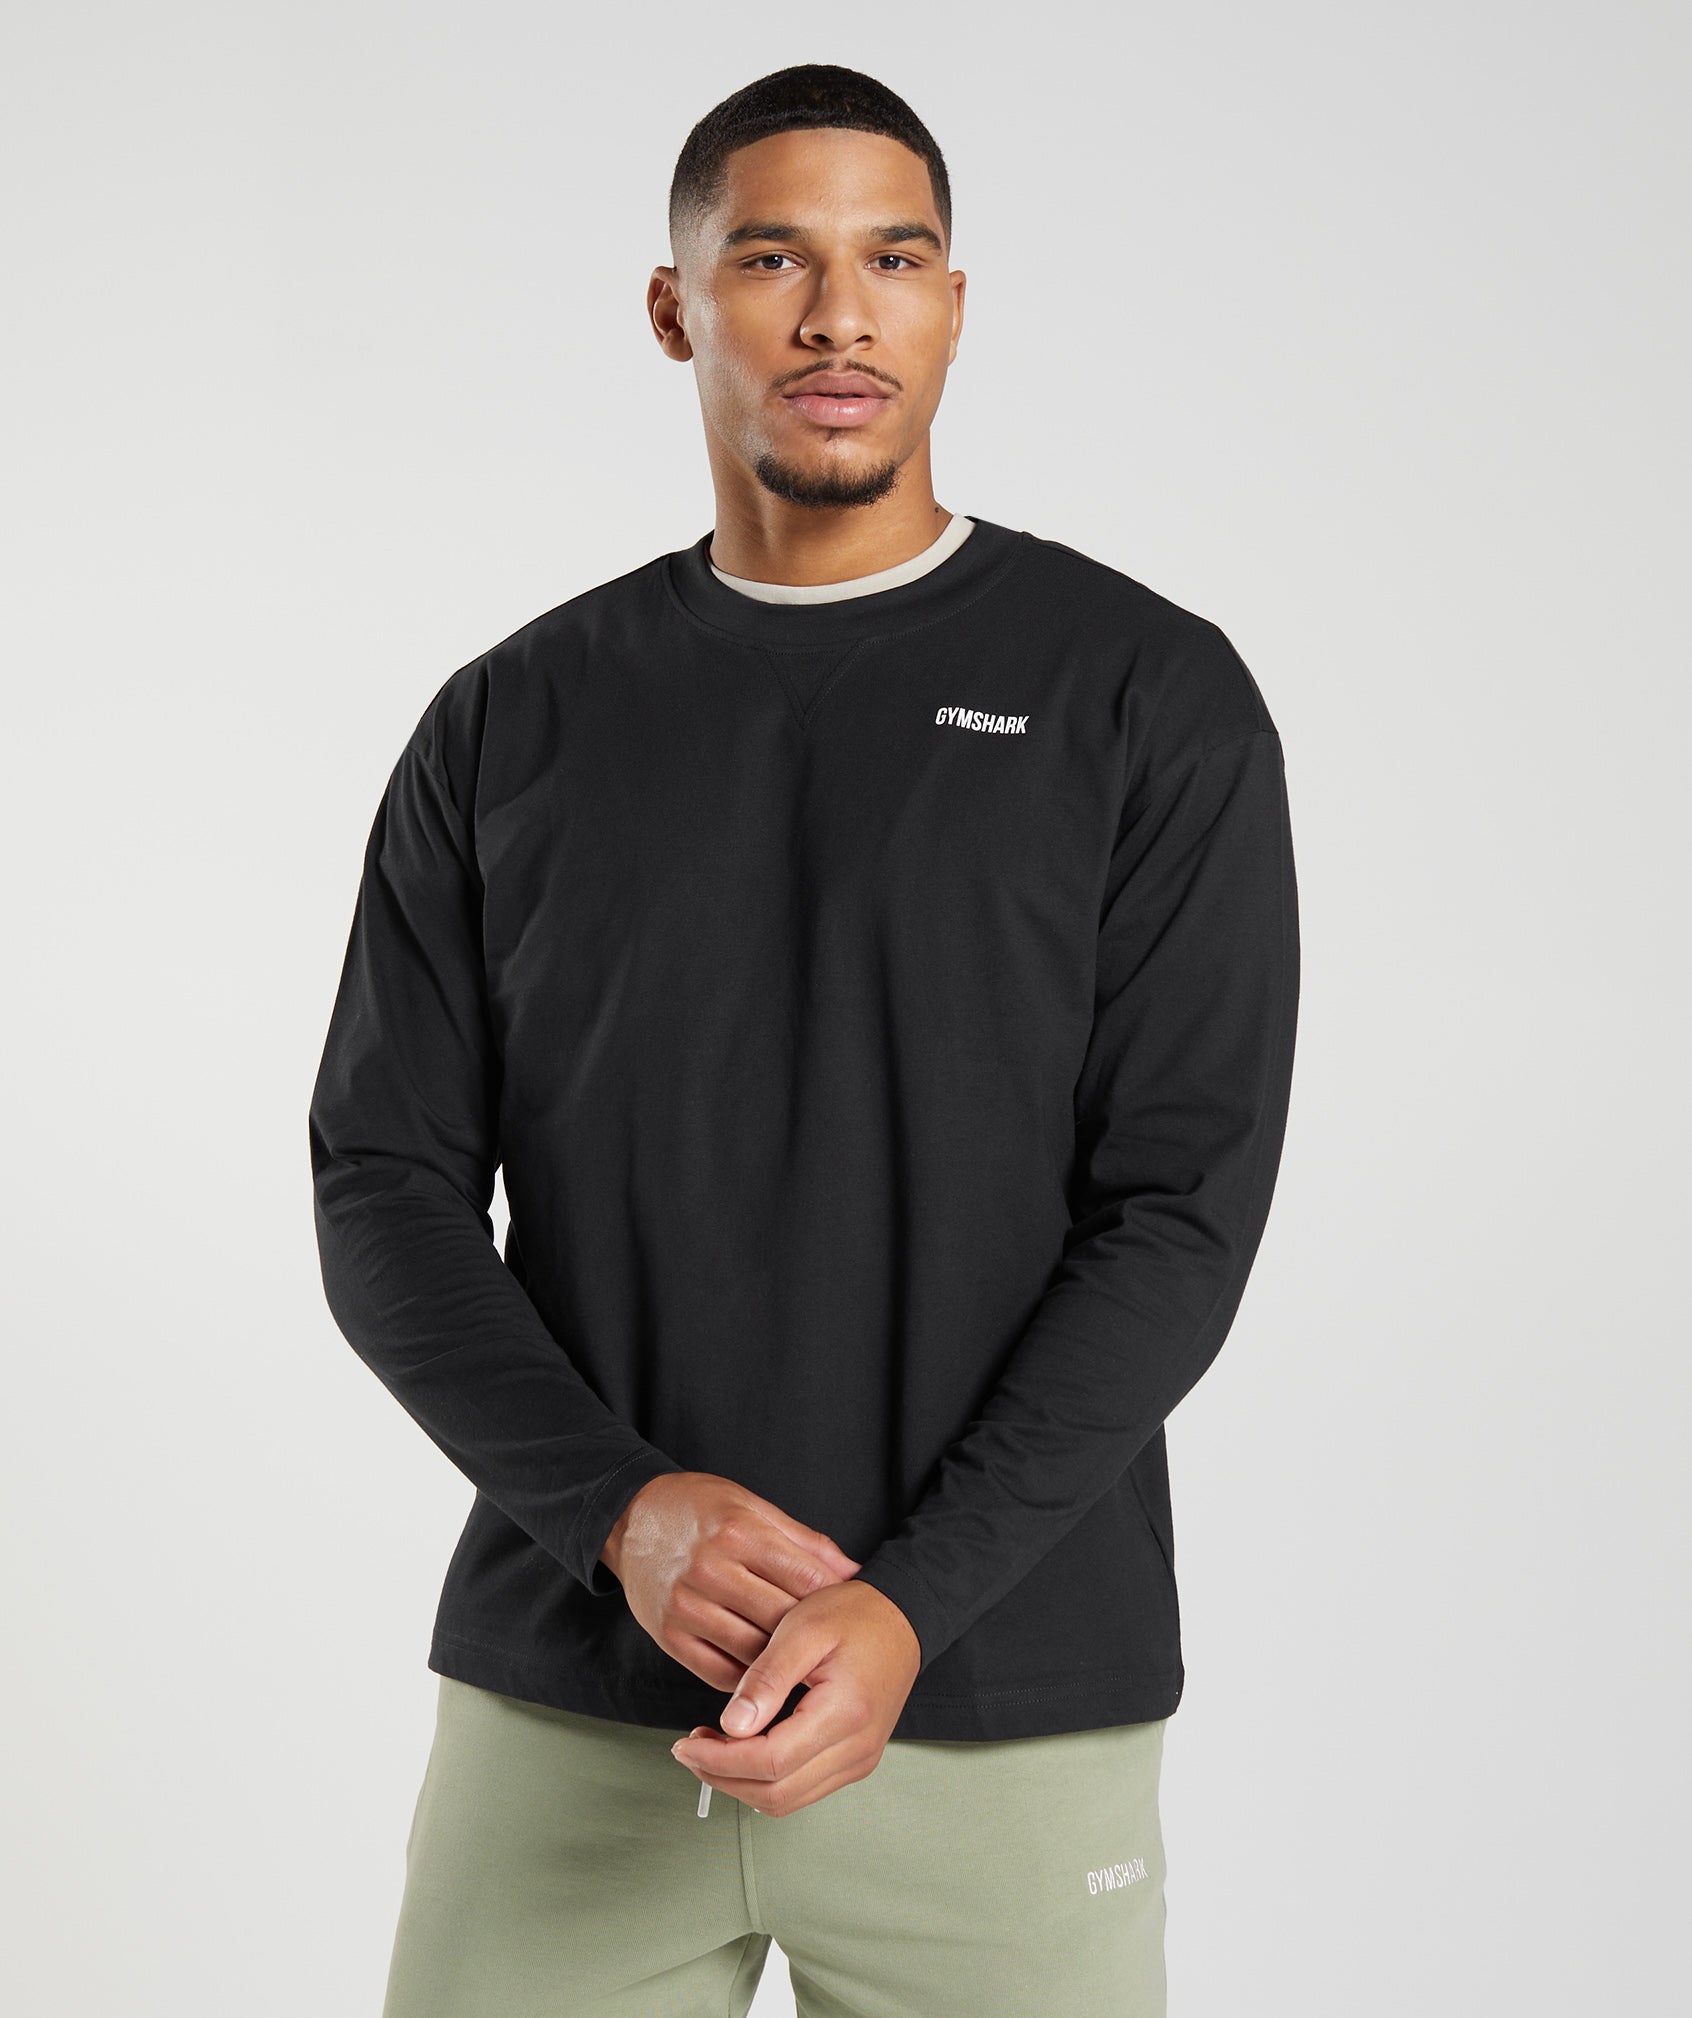 Hommes Zip Neck Slim Fit Manches longues Tops + Bottom Athletic